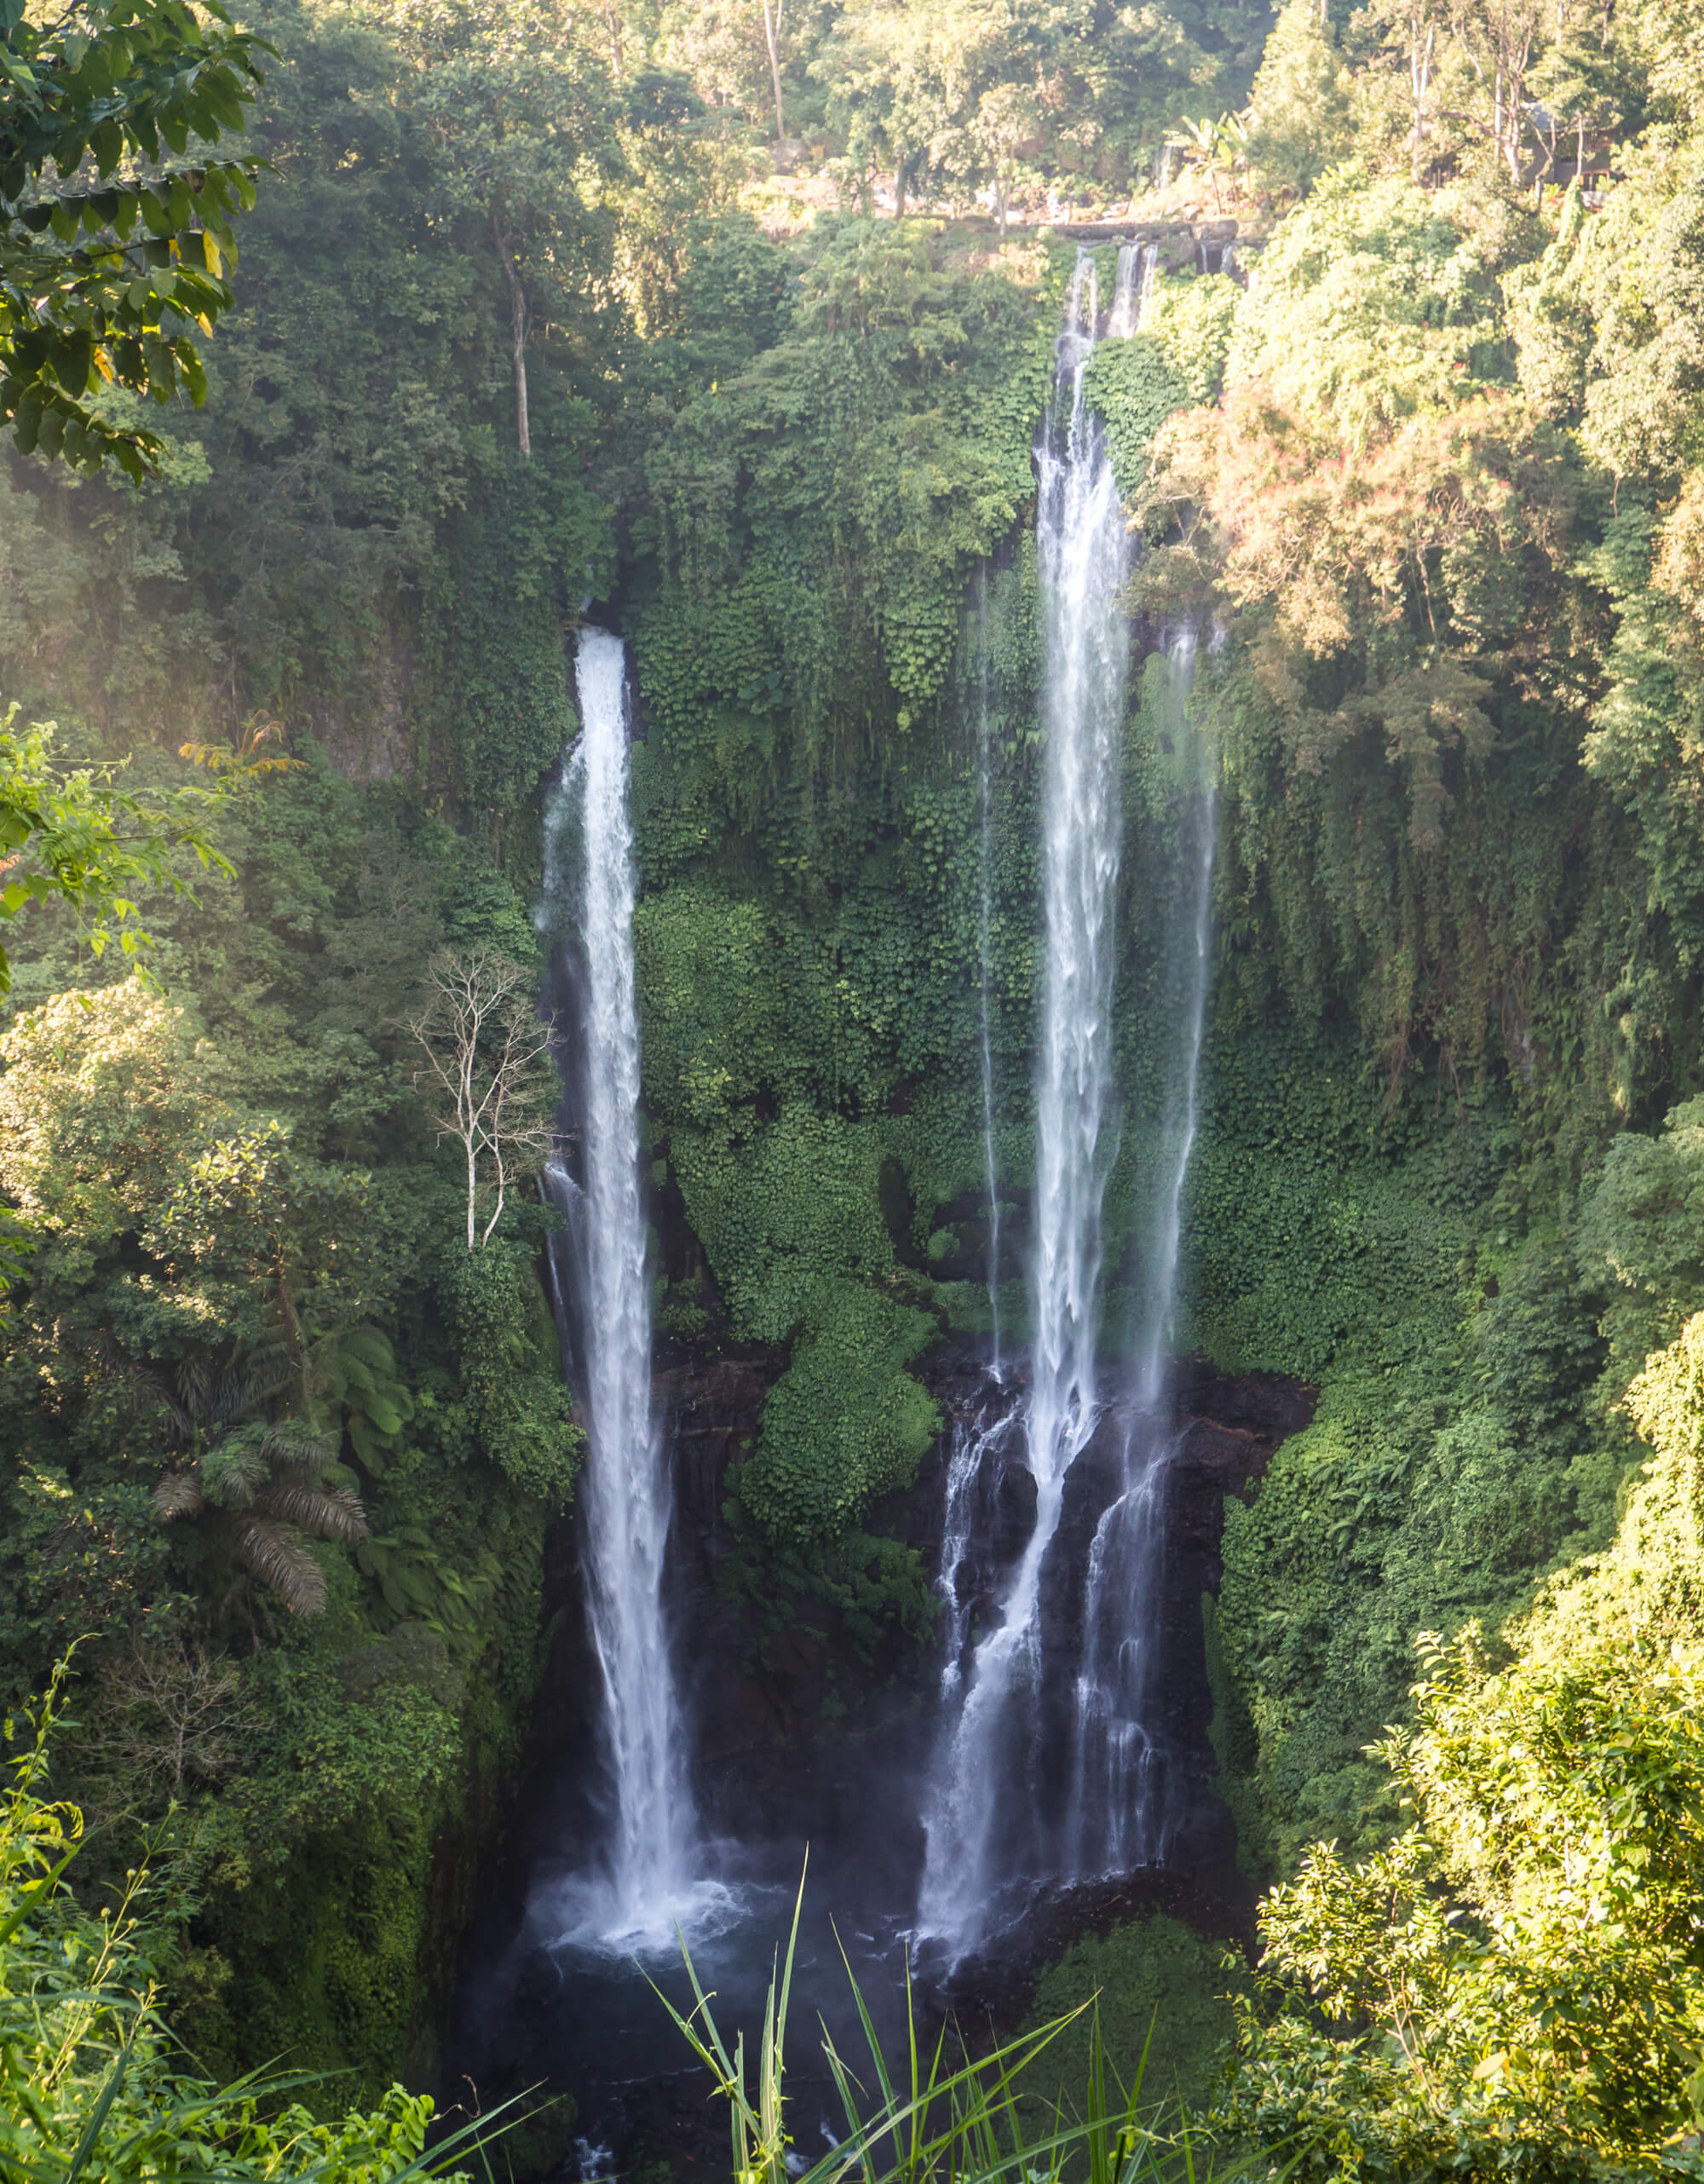 Air Terjun Sekumpul - The most beautiful waterfall in Bali. Book a tour guide or drive there by yourself - Here's how!